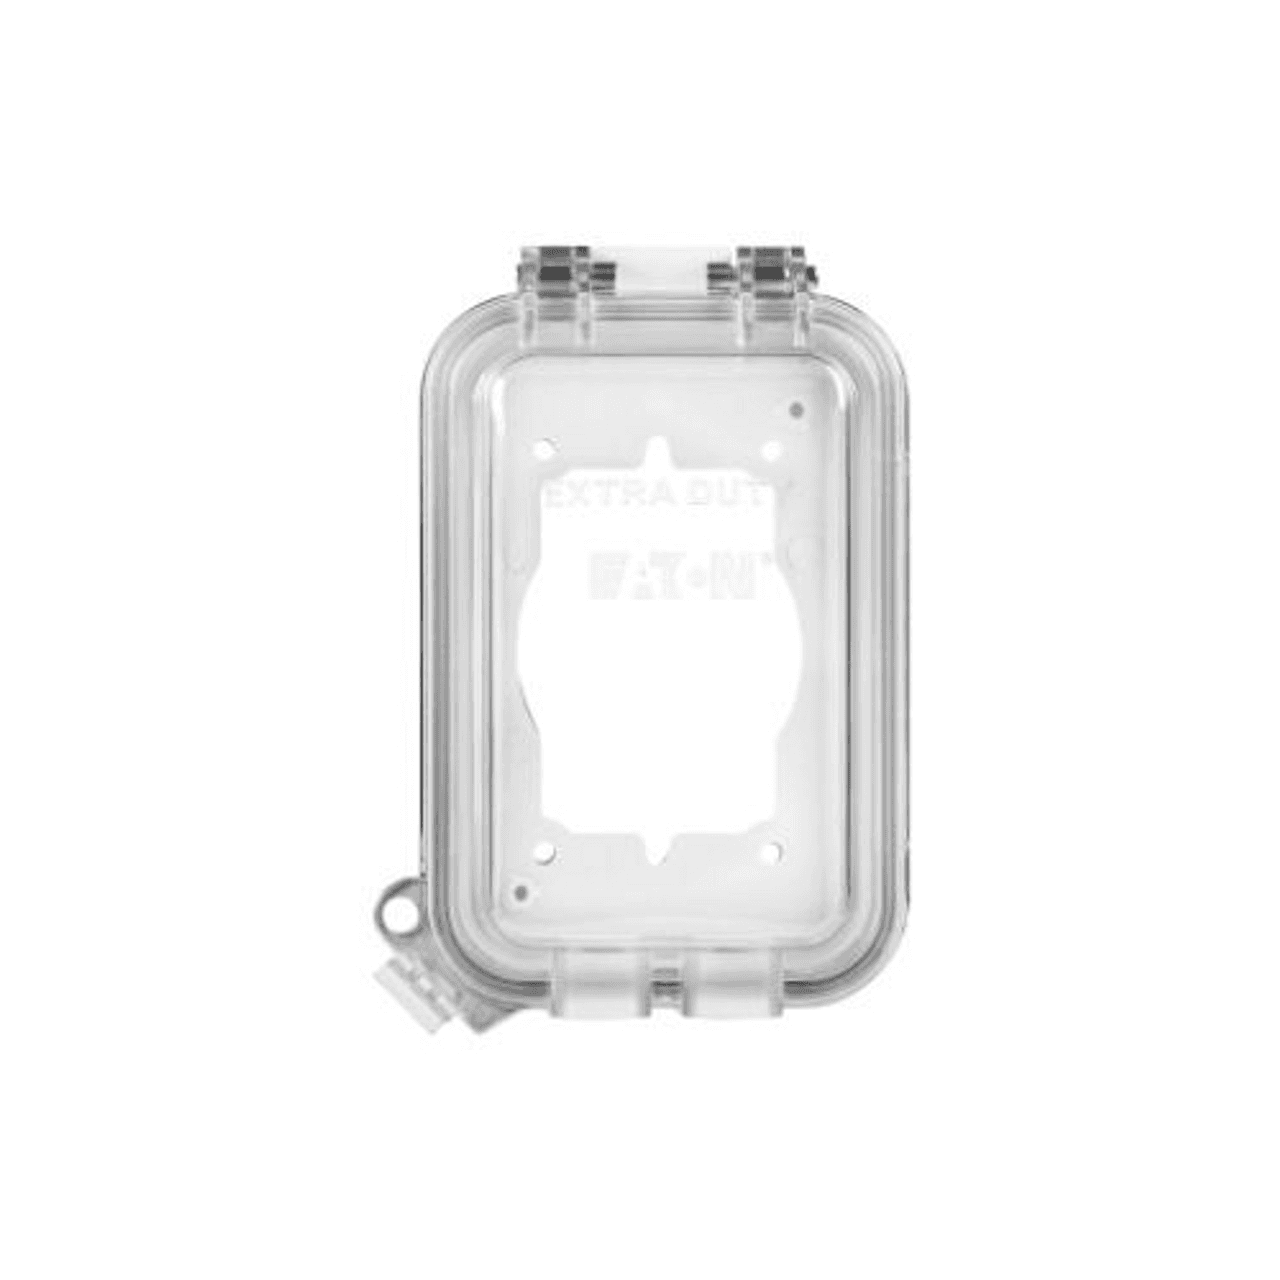 Eaton WIU-1WVX 3.29" x 4.23" x 6.22", 1-Gang, NEMA 3R, White, Rugged UV Resistant Polycarbonate, Vertical Mount, Single/Duplex Receptacle, Toggle Switch, Self-Closing, Extra Duty